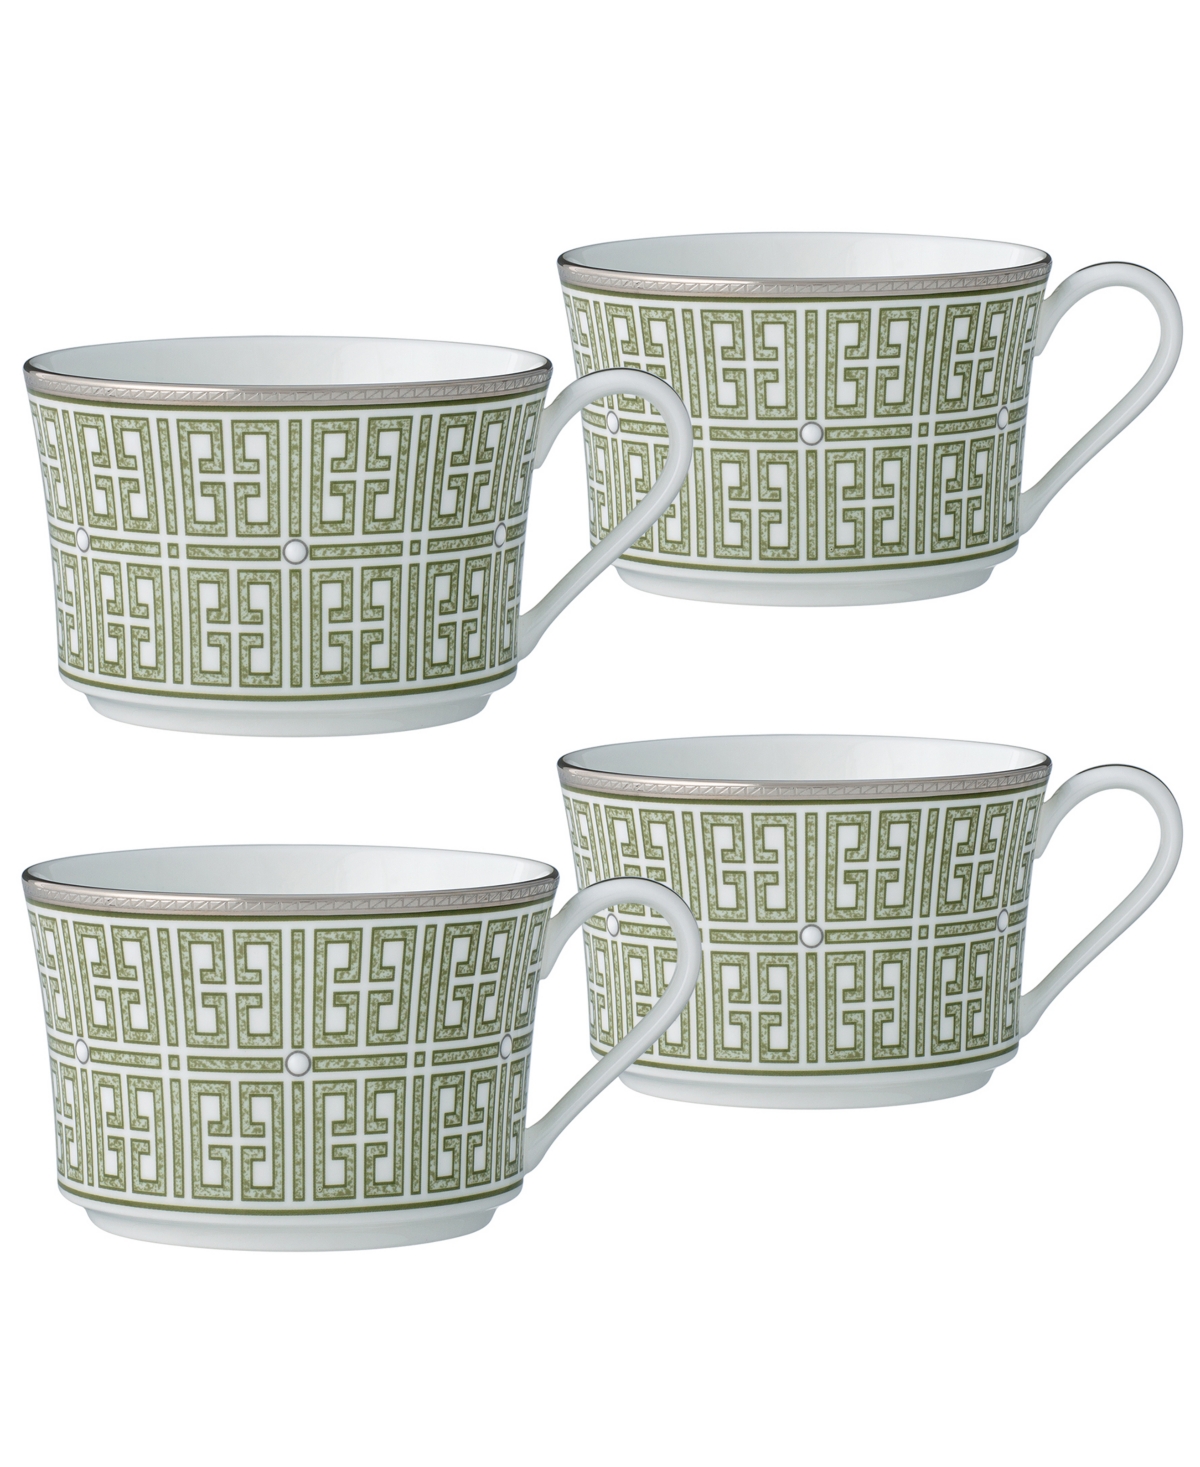 Noritake Infinity 4 Piece Cup Set, Service For 4 In Green Platinum